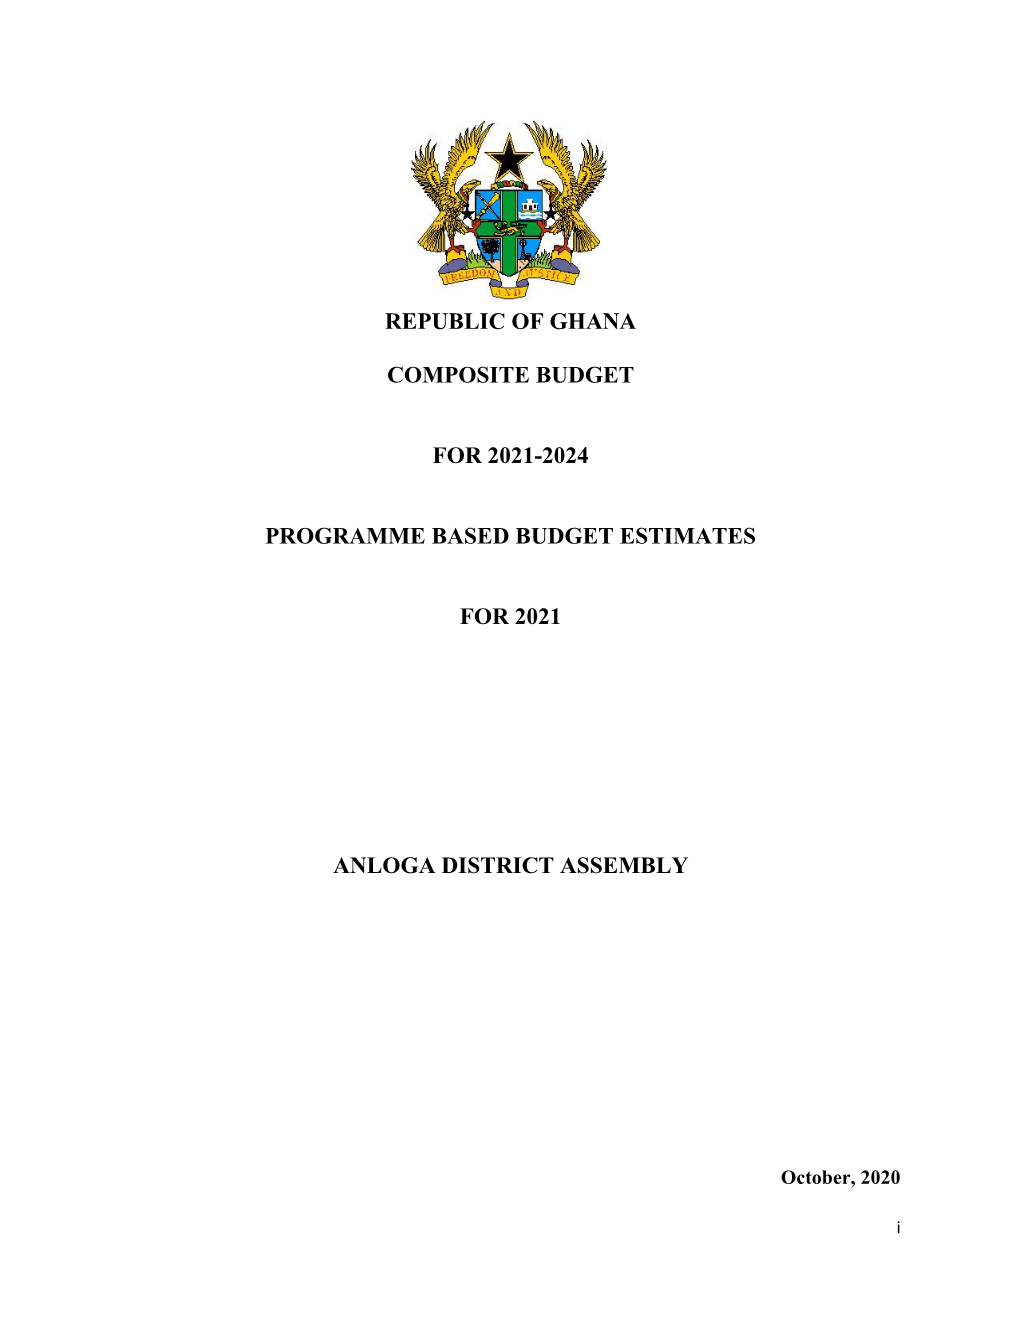 Republic of Ghana Composite Budget for 2021-2024 Programme Based Budget Estimates for 2021 Anloga District Assembly